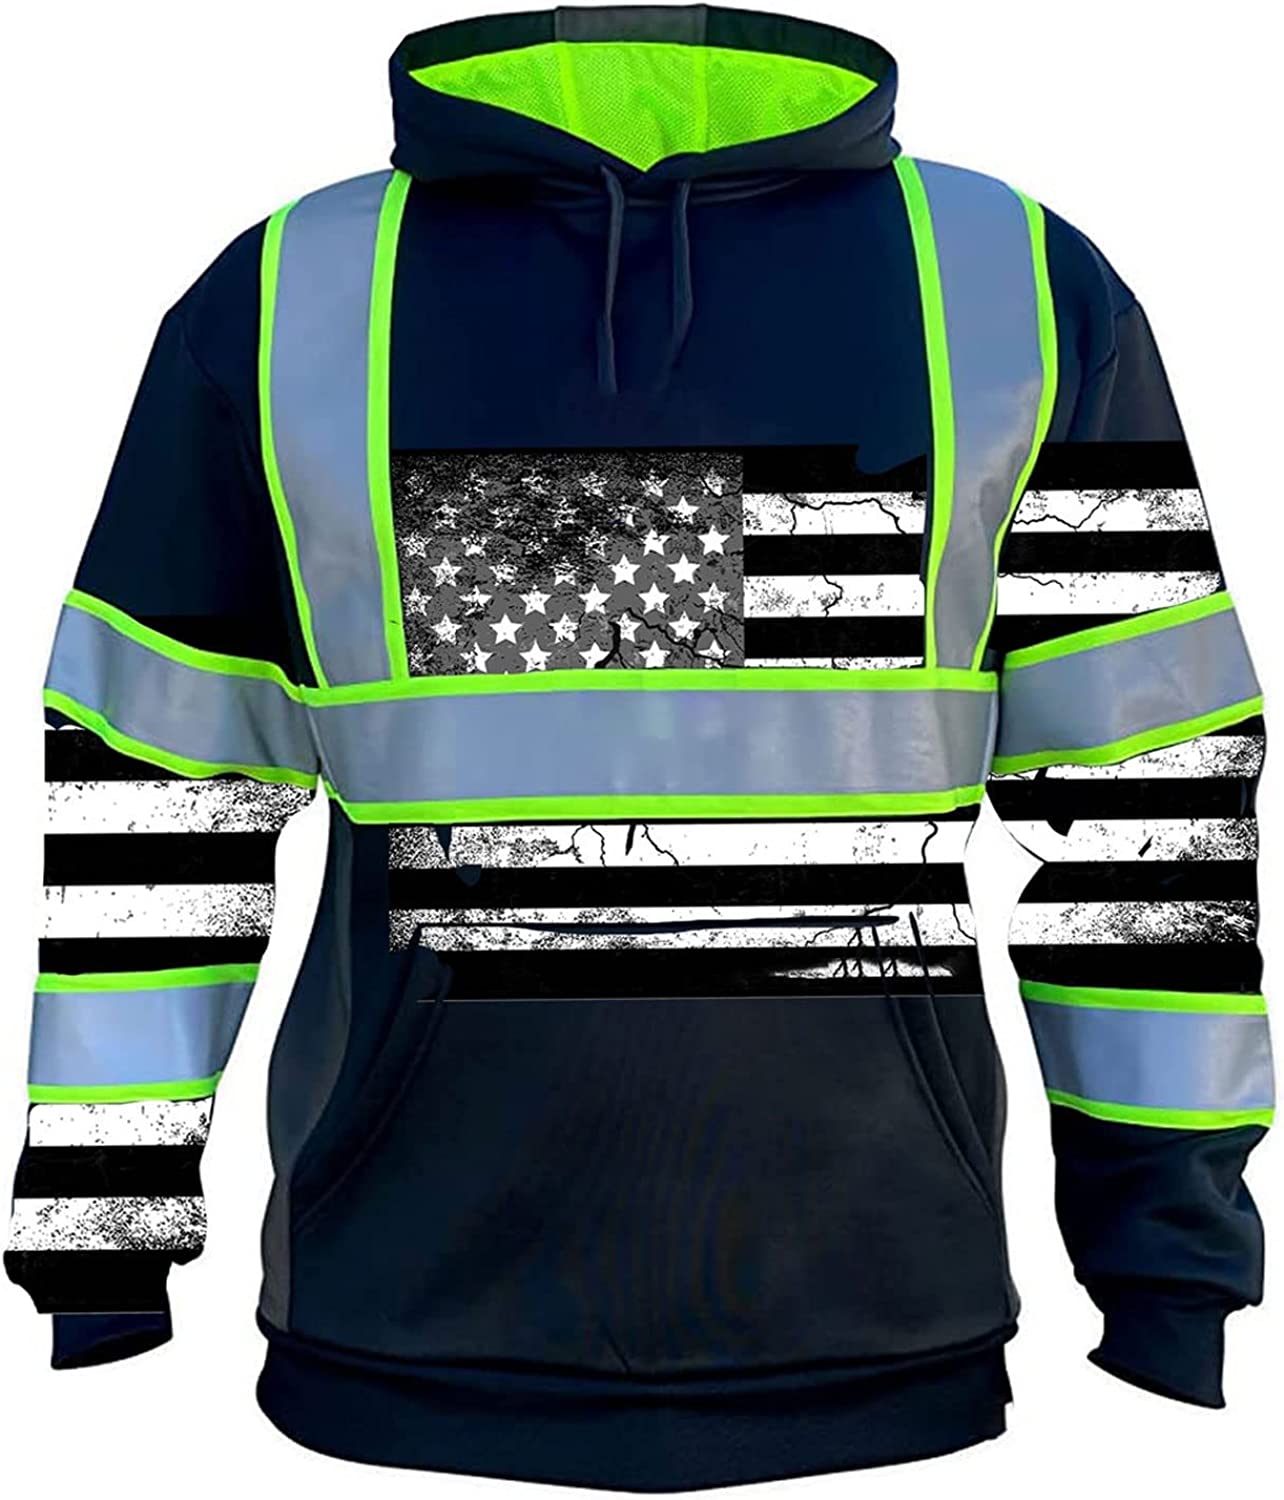 USA Flag Eagle Black White 3D Shirt with Protective Clothing Design, Featuring American Flag and Eagle, Perfect for Patriotic Veterans, Ideal Gift for Family Members, Available in Pullover Hoodie, Hawaiian Shirt, and Sweatshirt Variants. – JOT1439